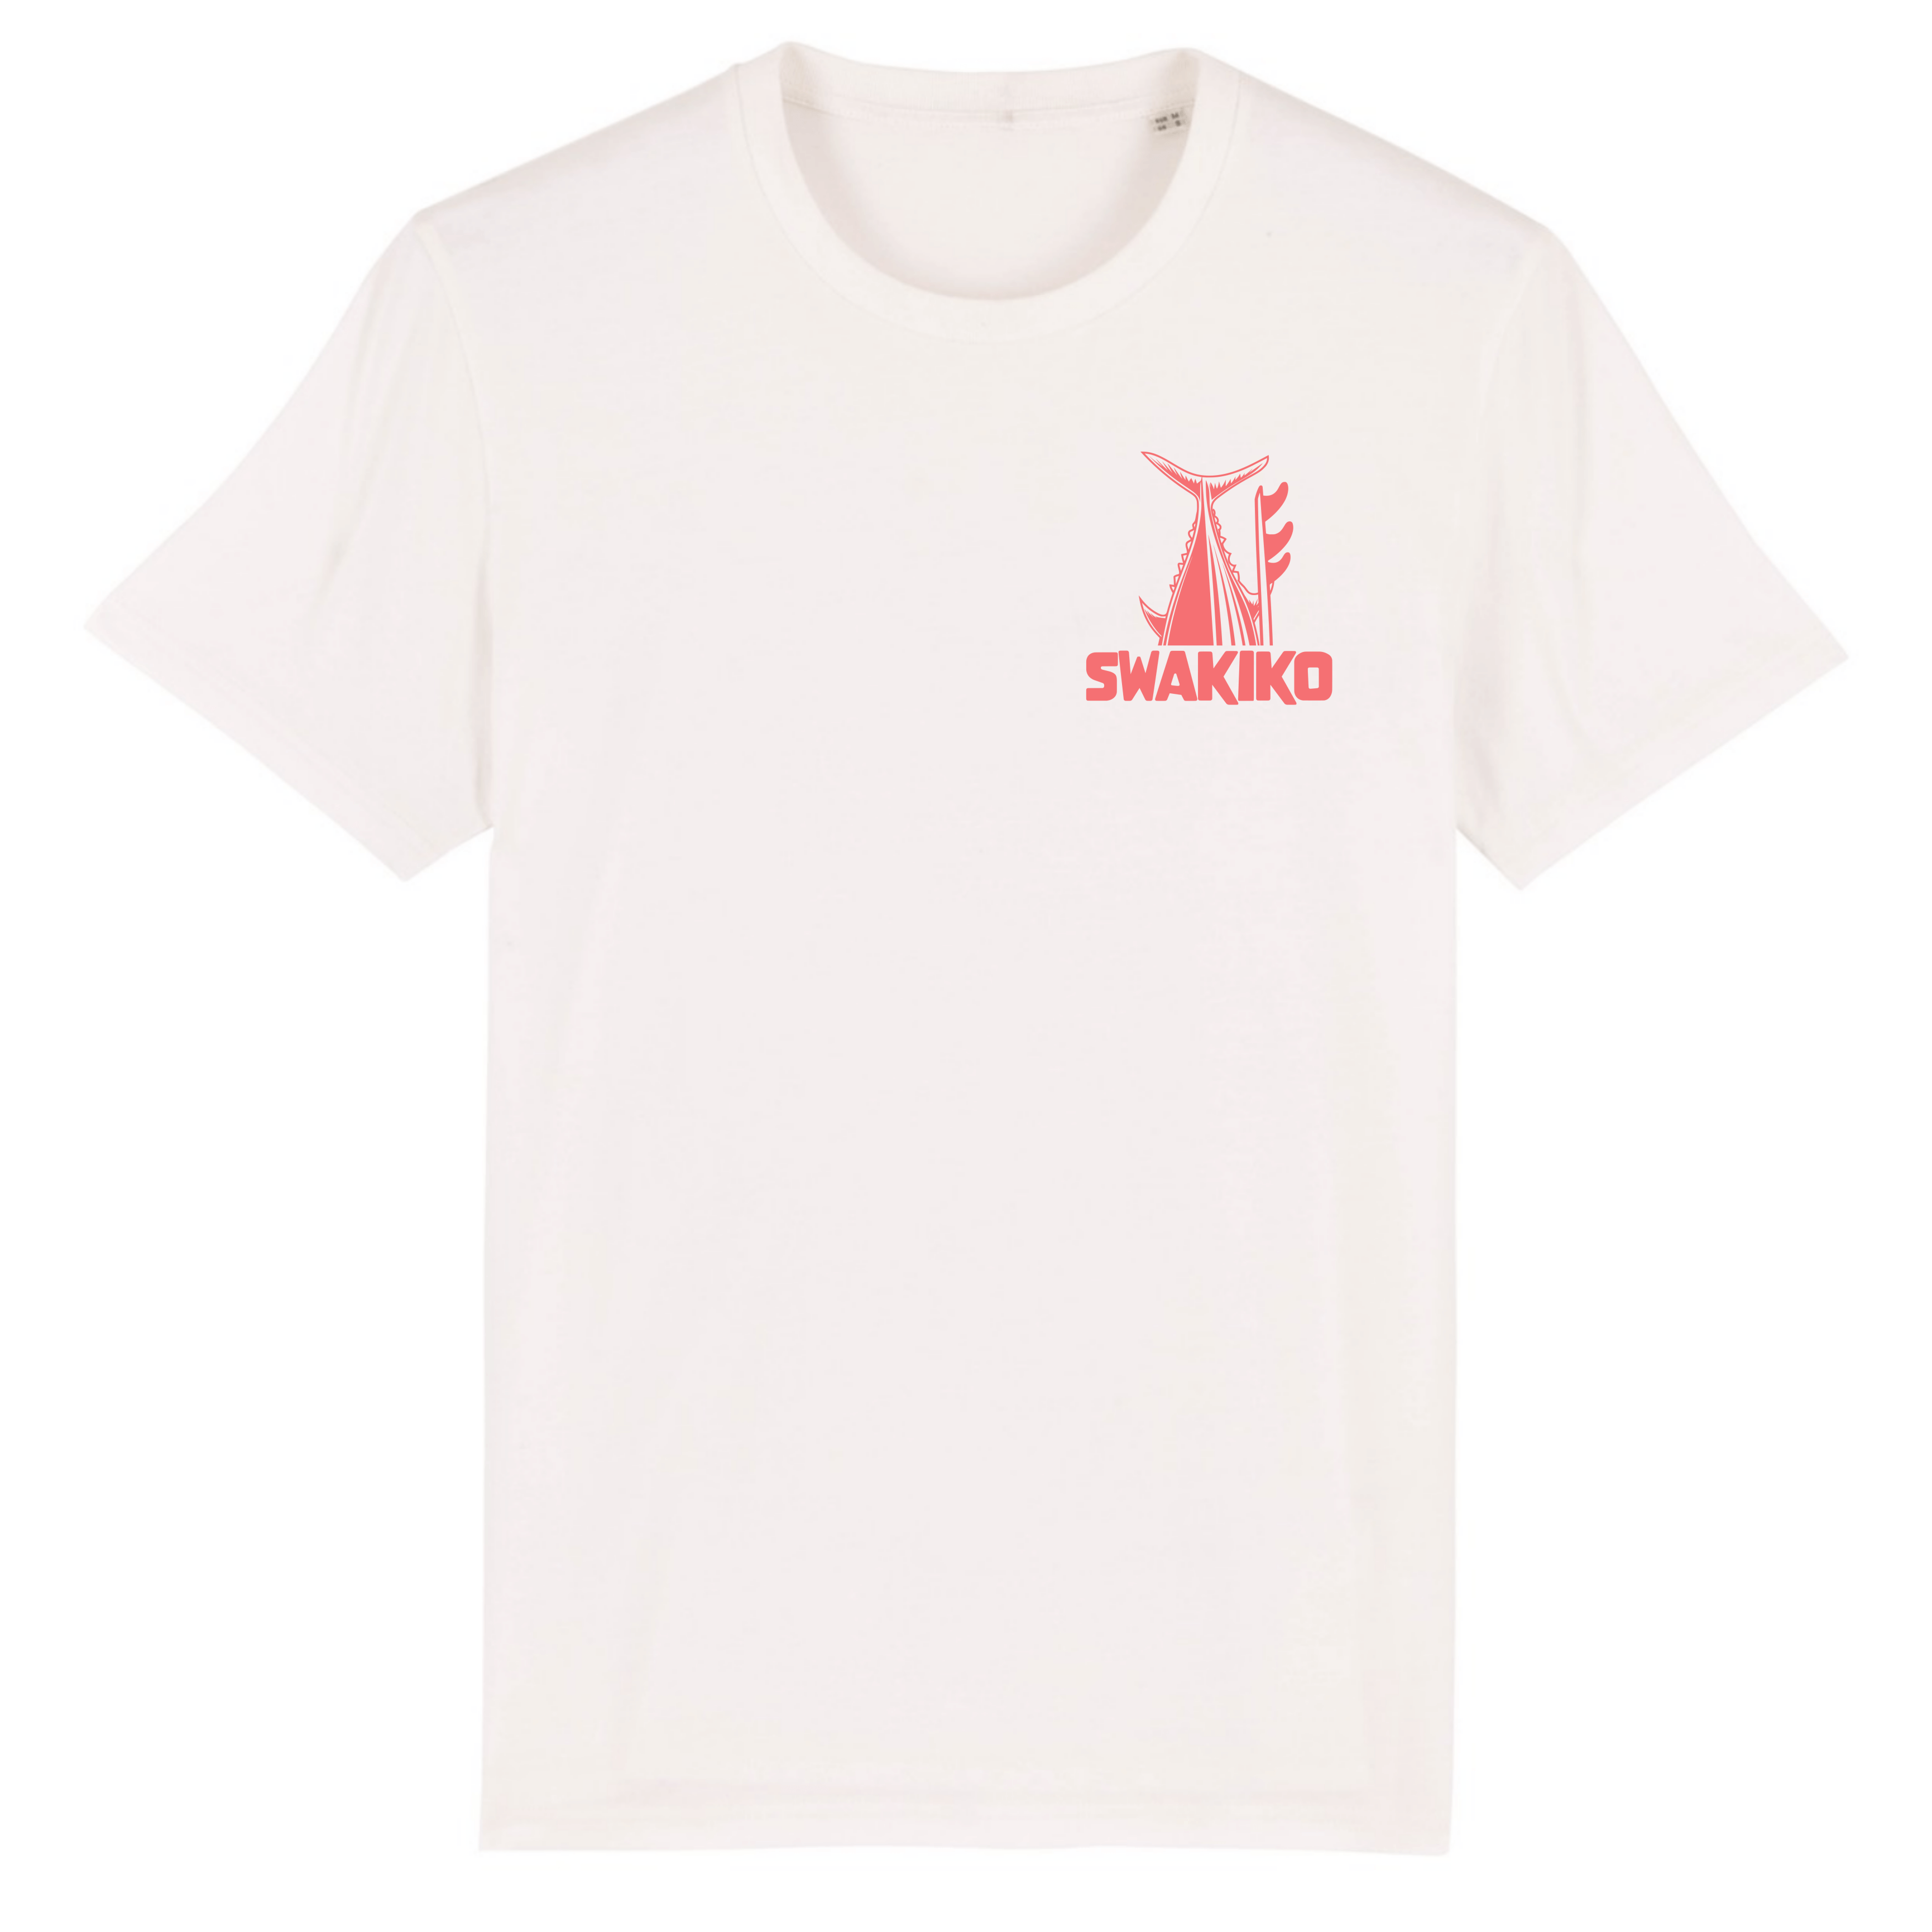 Surf T-shirt No bad days on the Water, white front